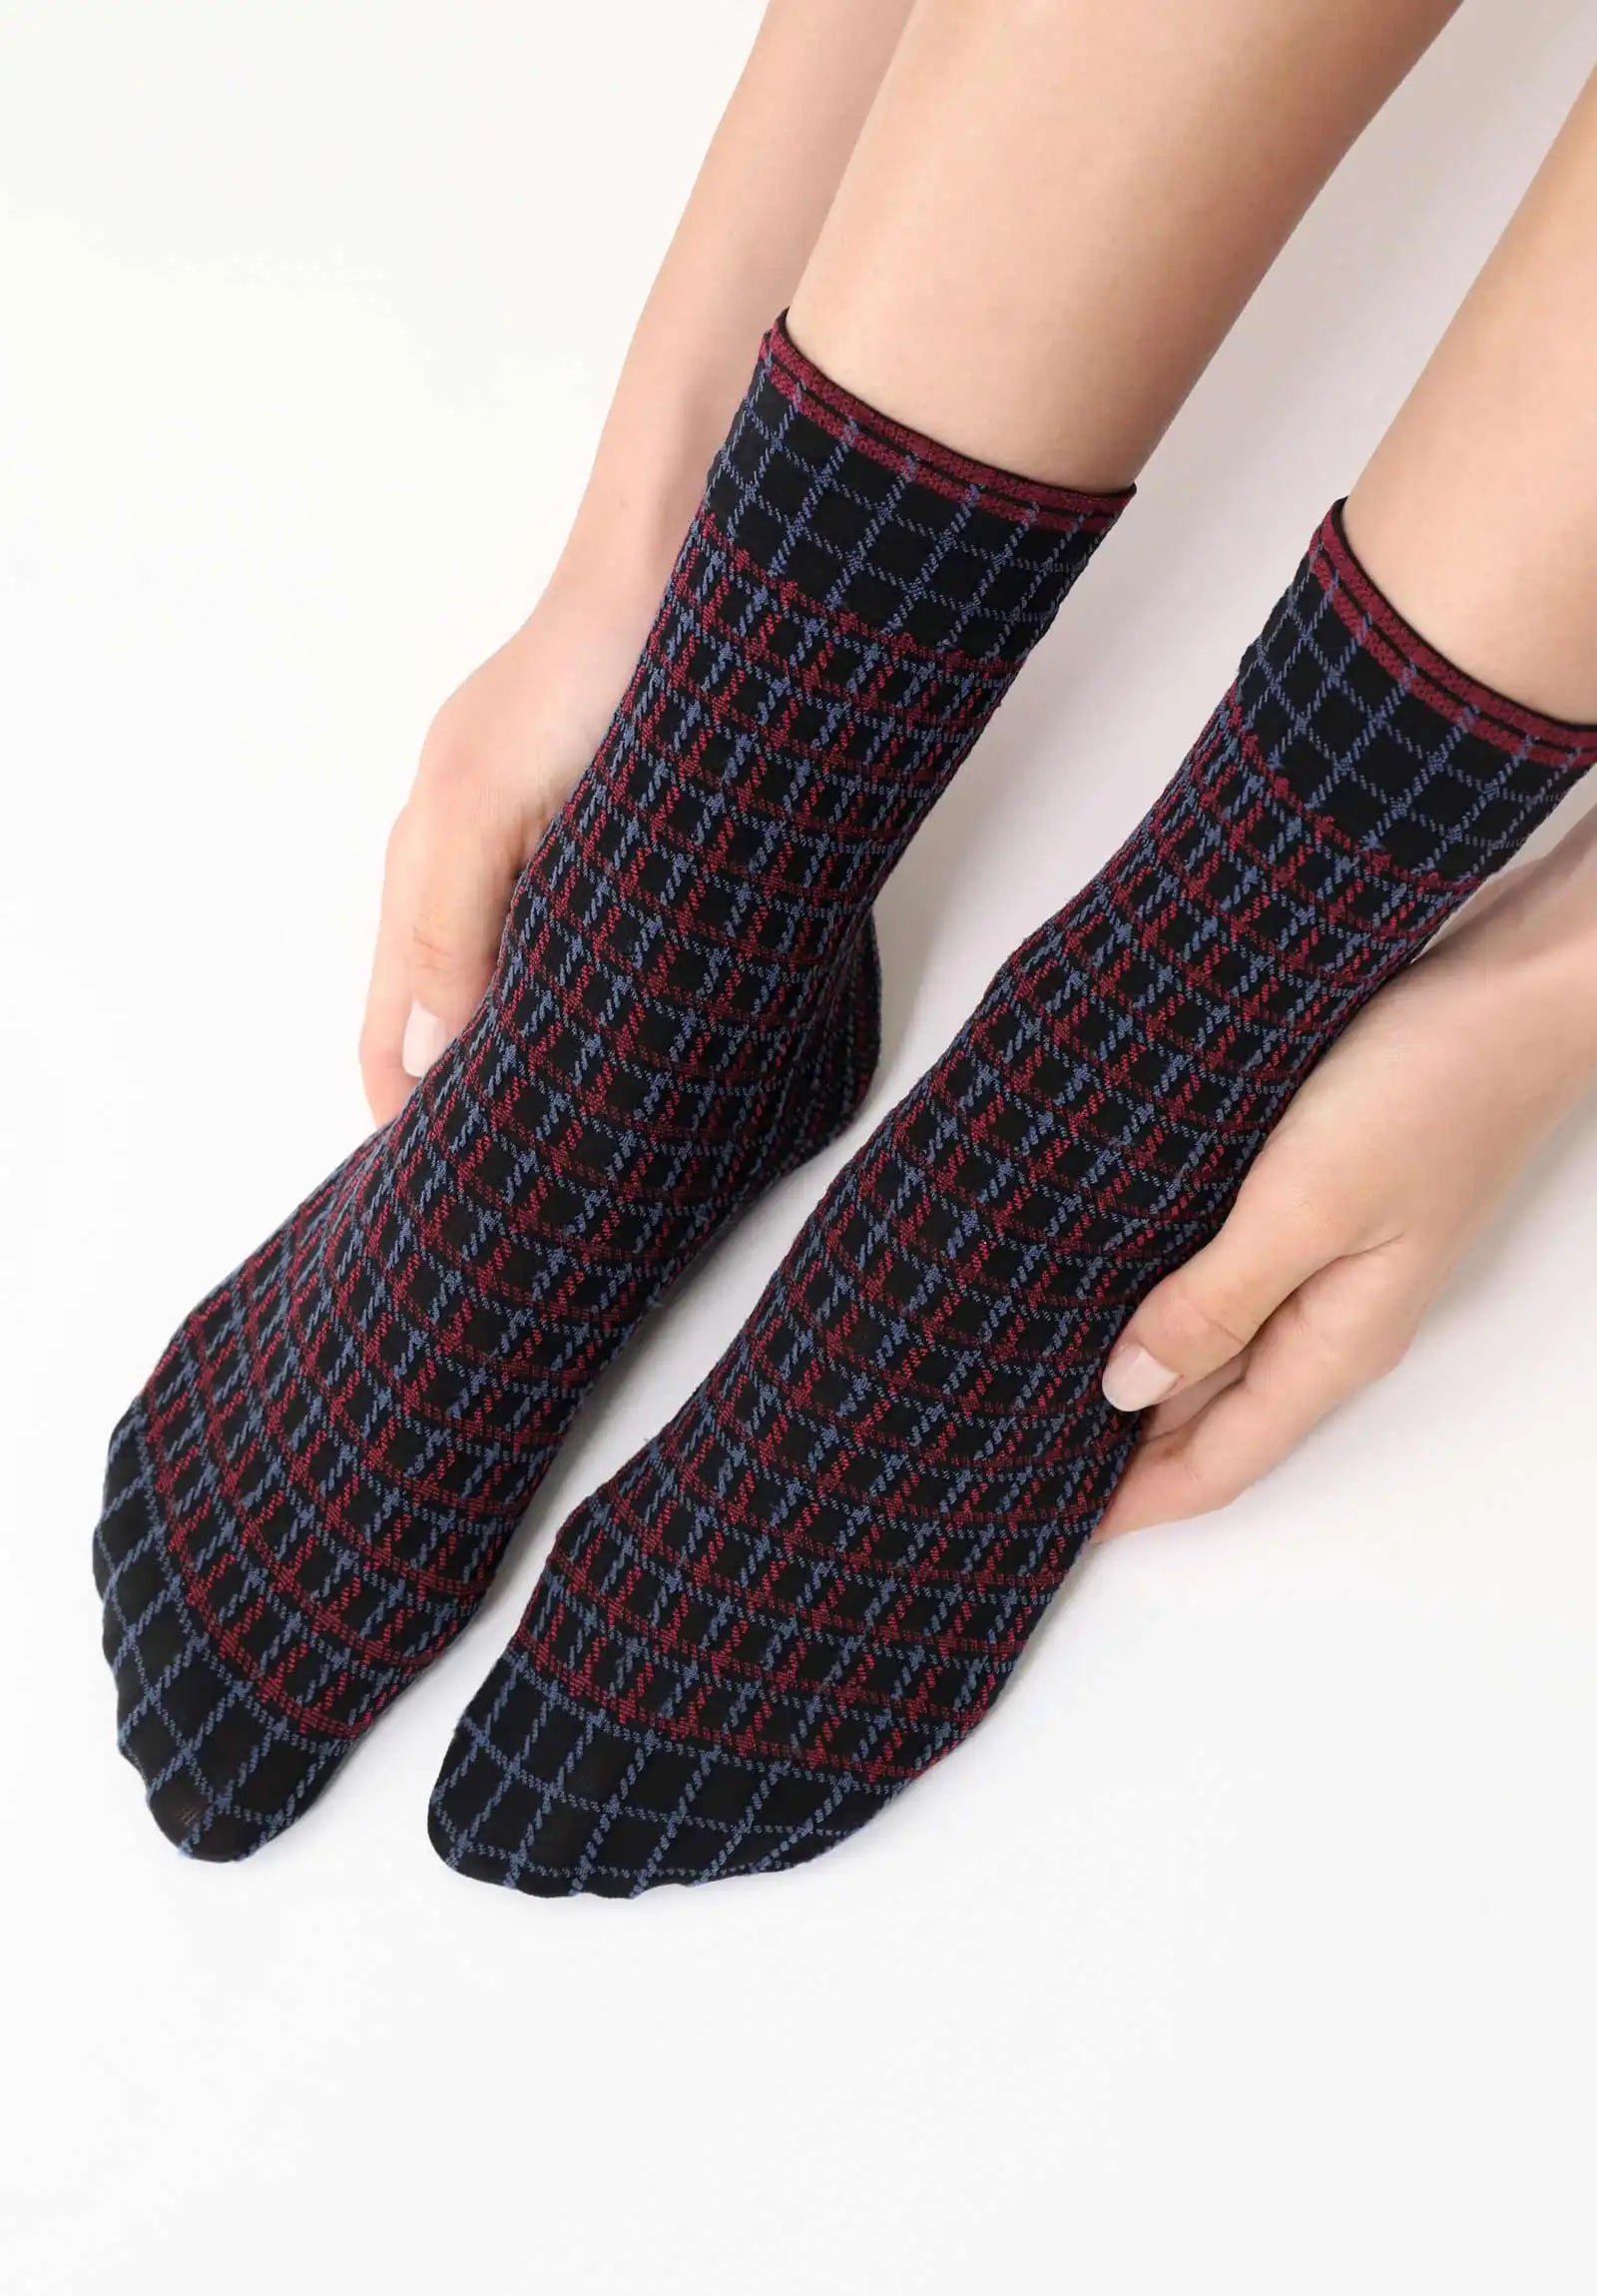 Oroblù Color Check Calzino - Dark navy opaque fashion ankle socks with a tartan check style linear pattern in blue and red and deep elasticated comfort cuff.